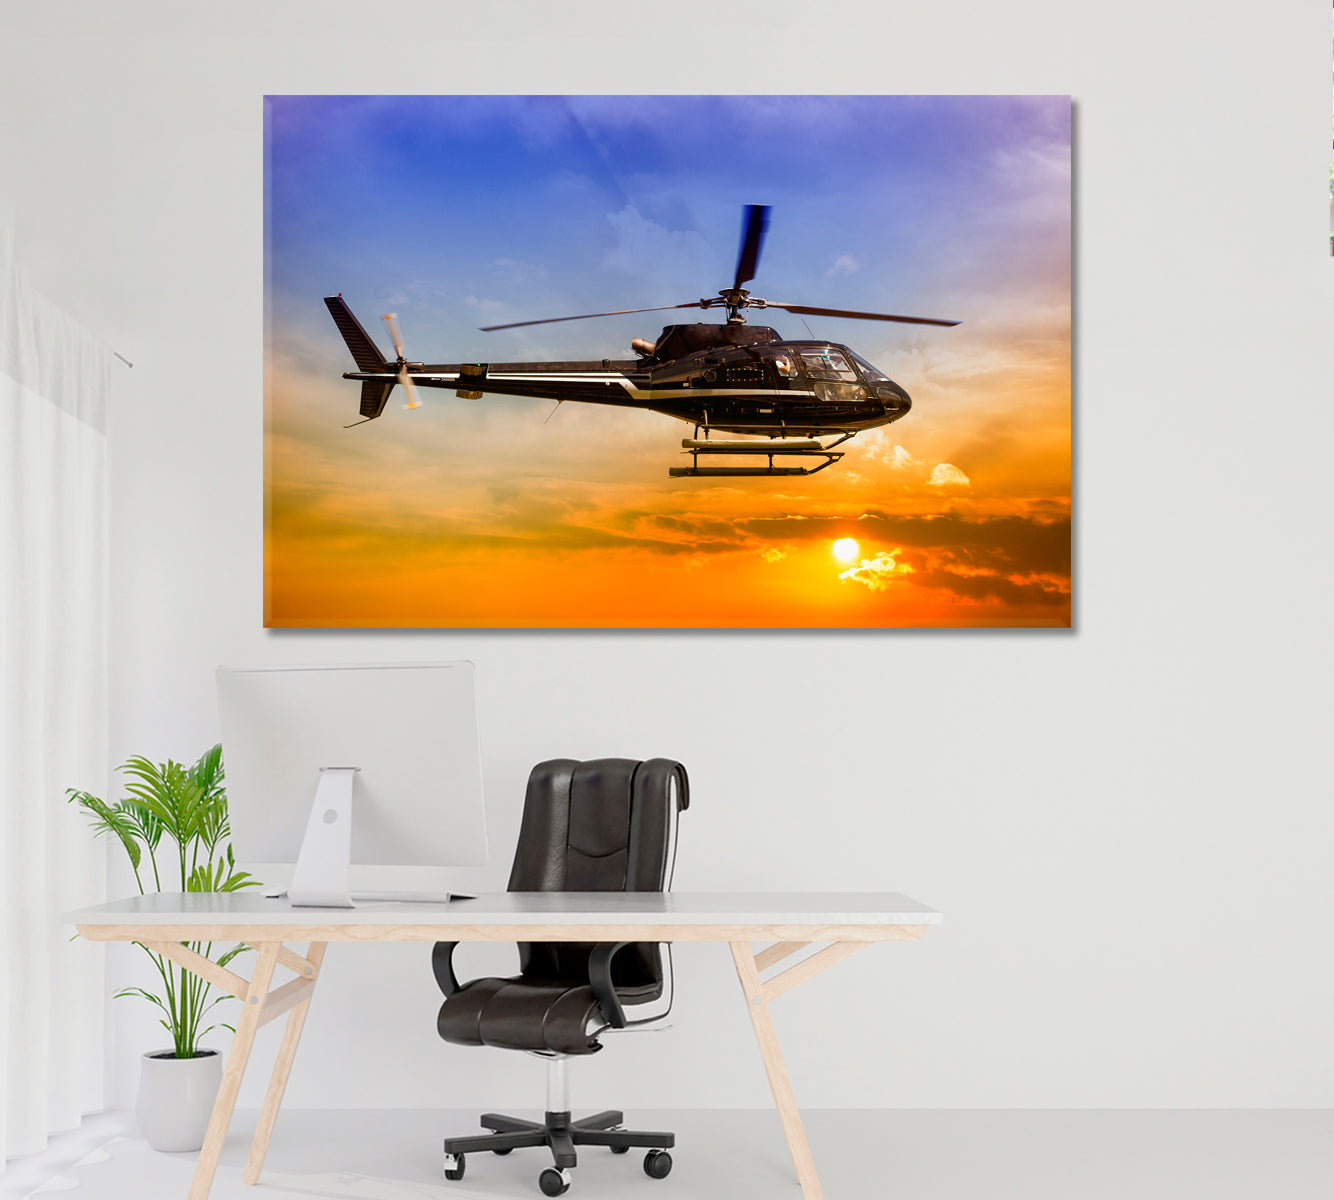 Sightseeing Helicopter Canvas Print ArtLexy 1 Panel 24"x16" inches 